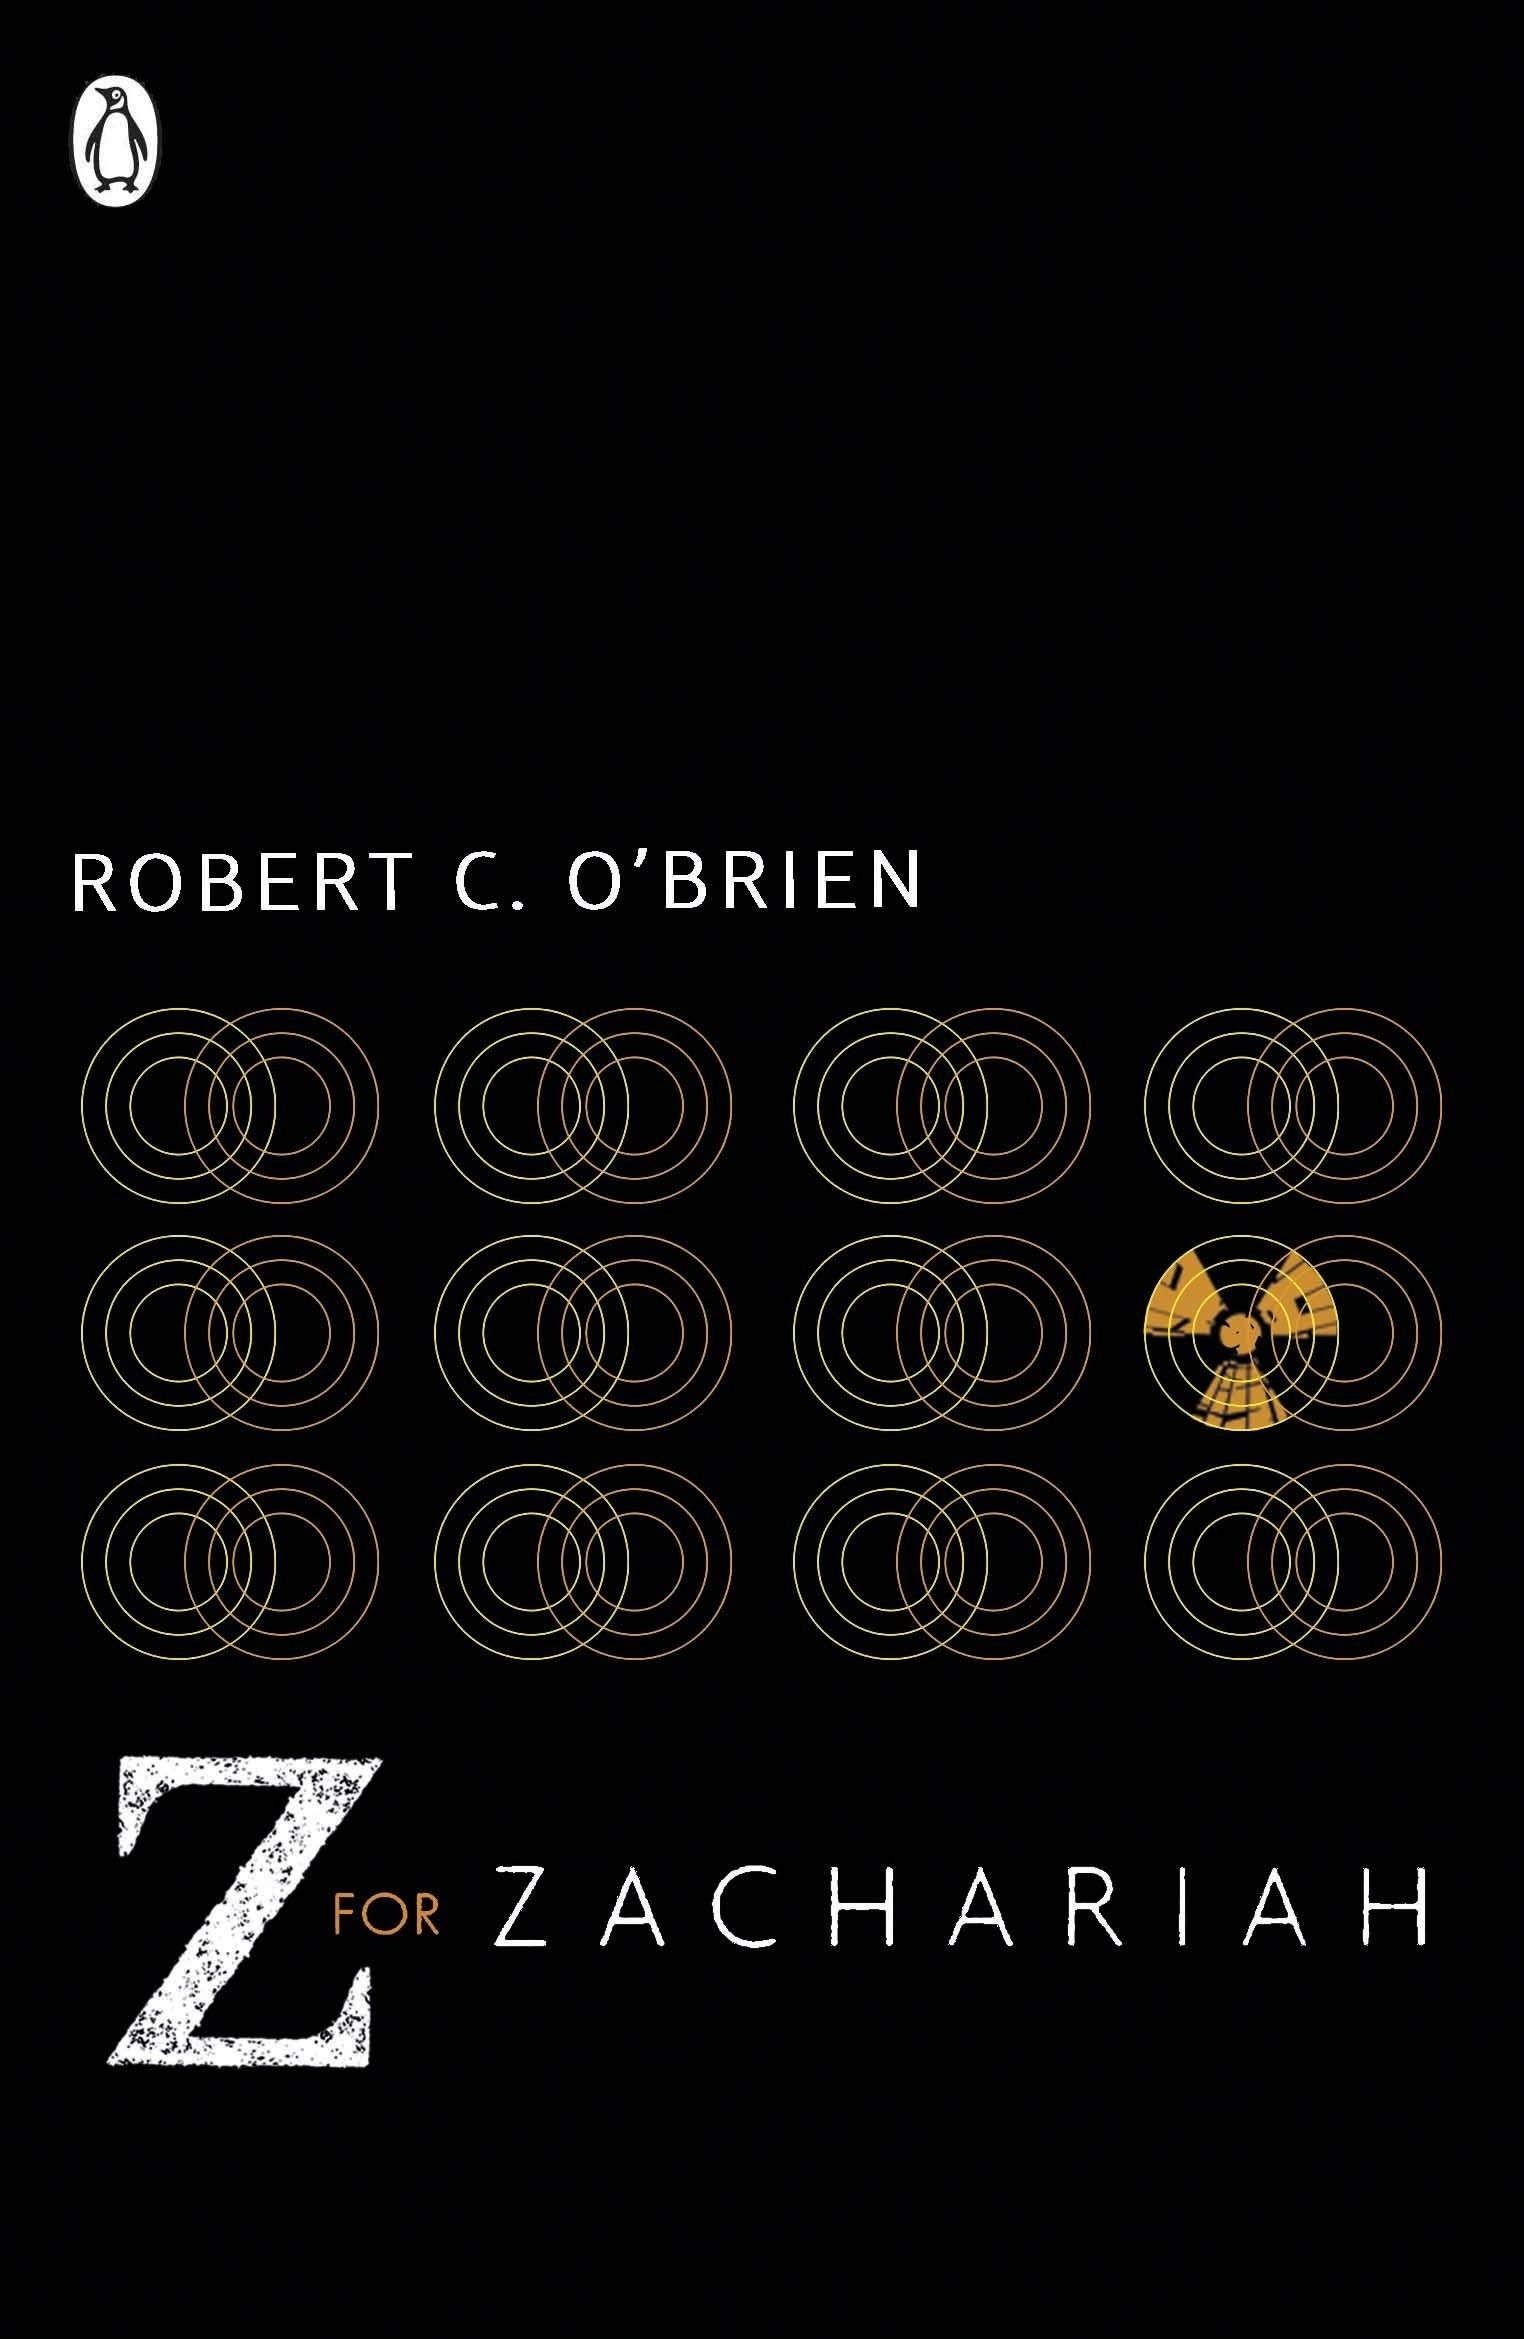 A black book cover with white circles on it and the title in bold white letters.